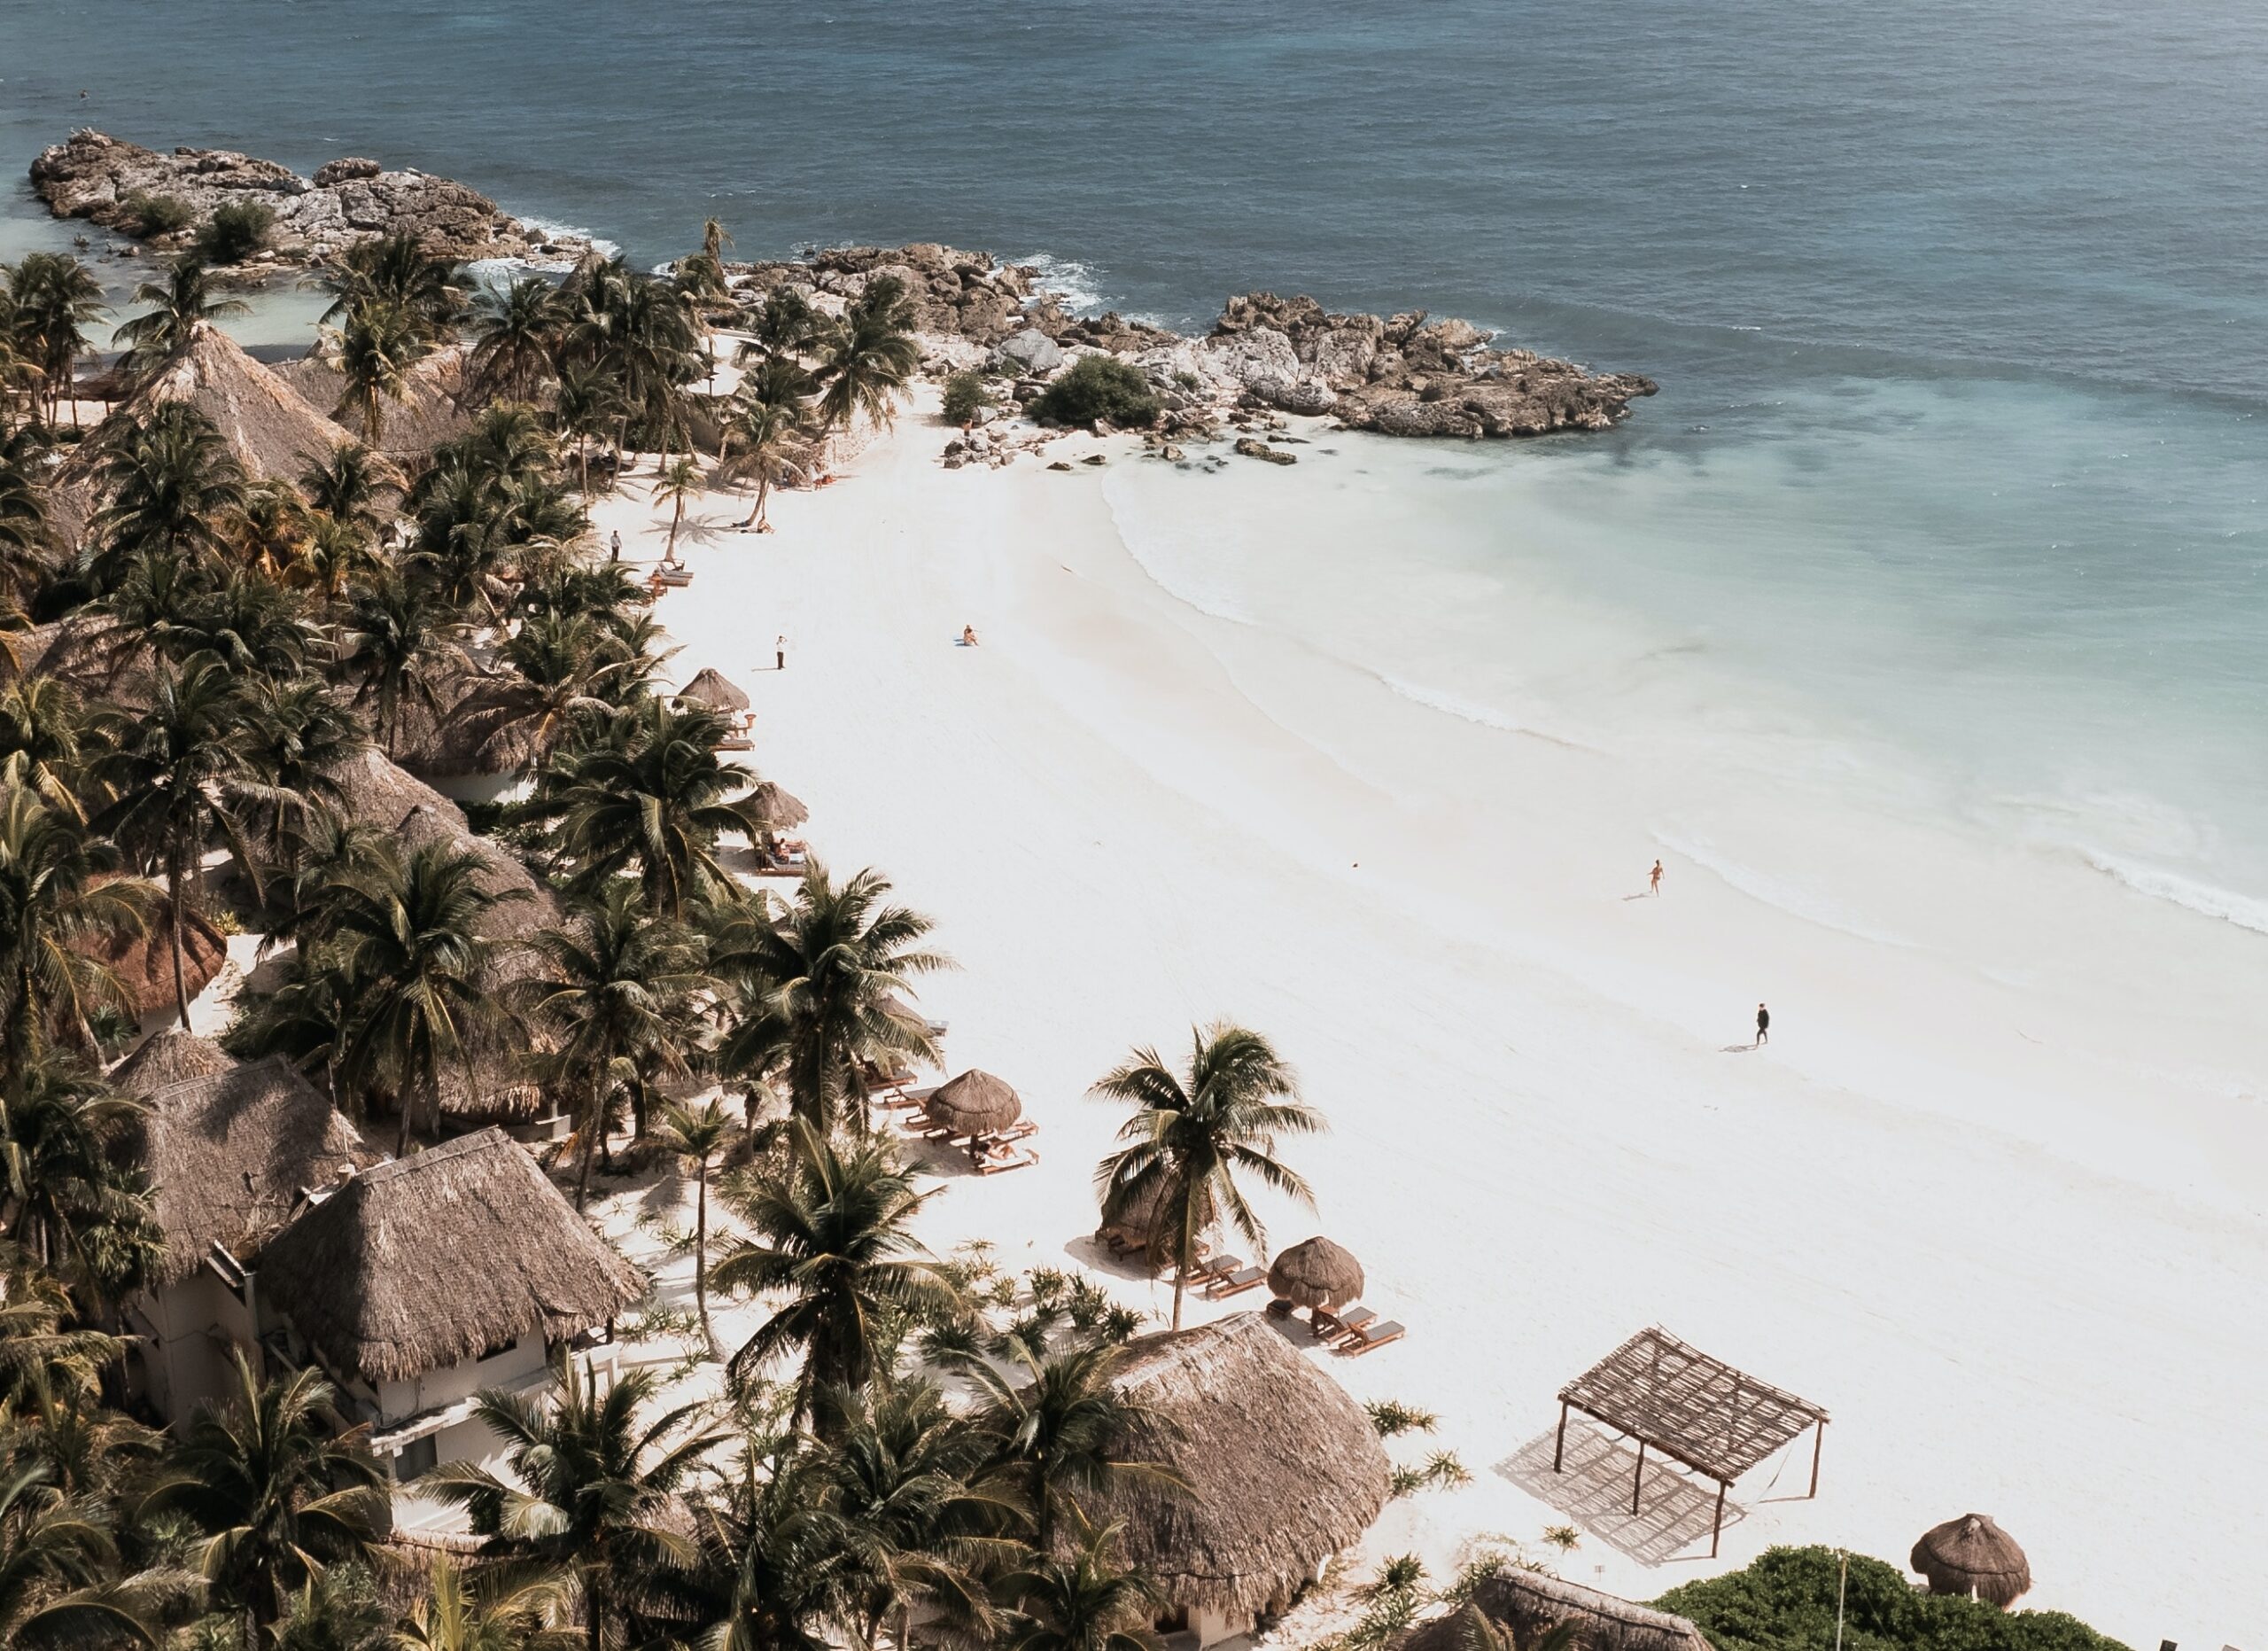 Learn more about one of the best resorts in Tulum, which is an all-inclusive experience. 
Pictured: A Tulum beach with resort huts surrounding the sandy coast